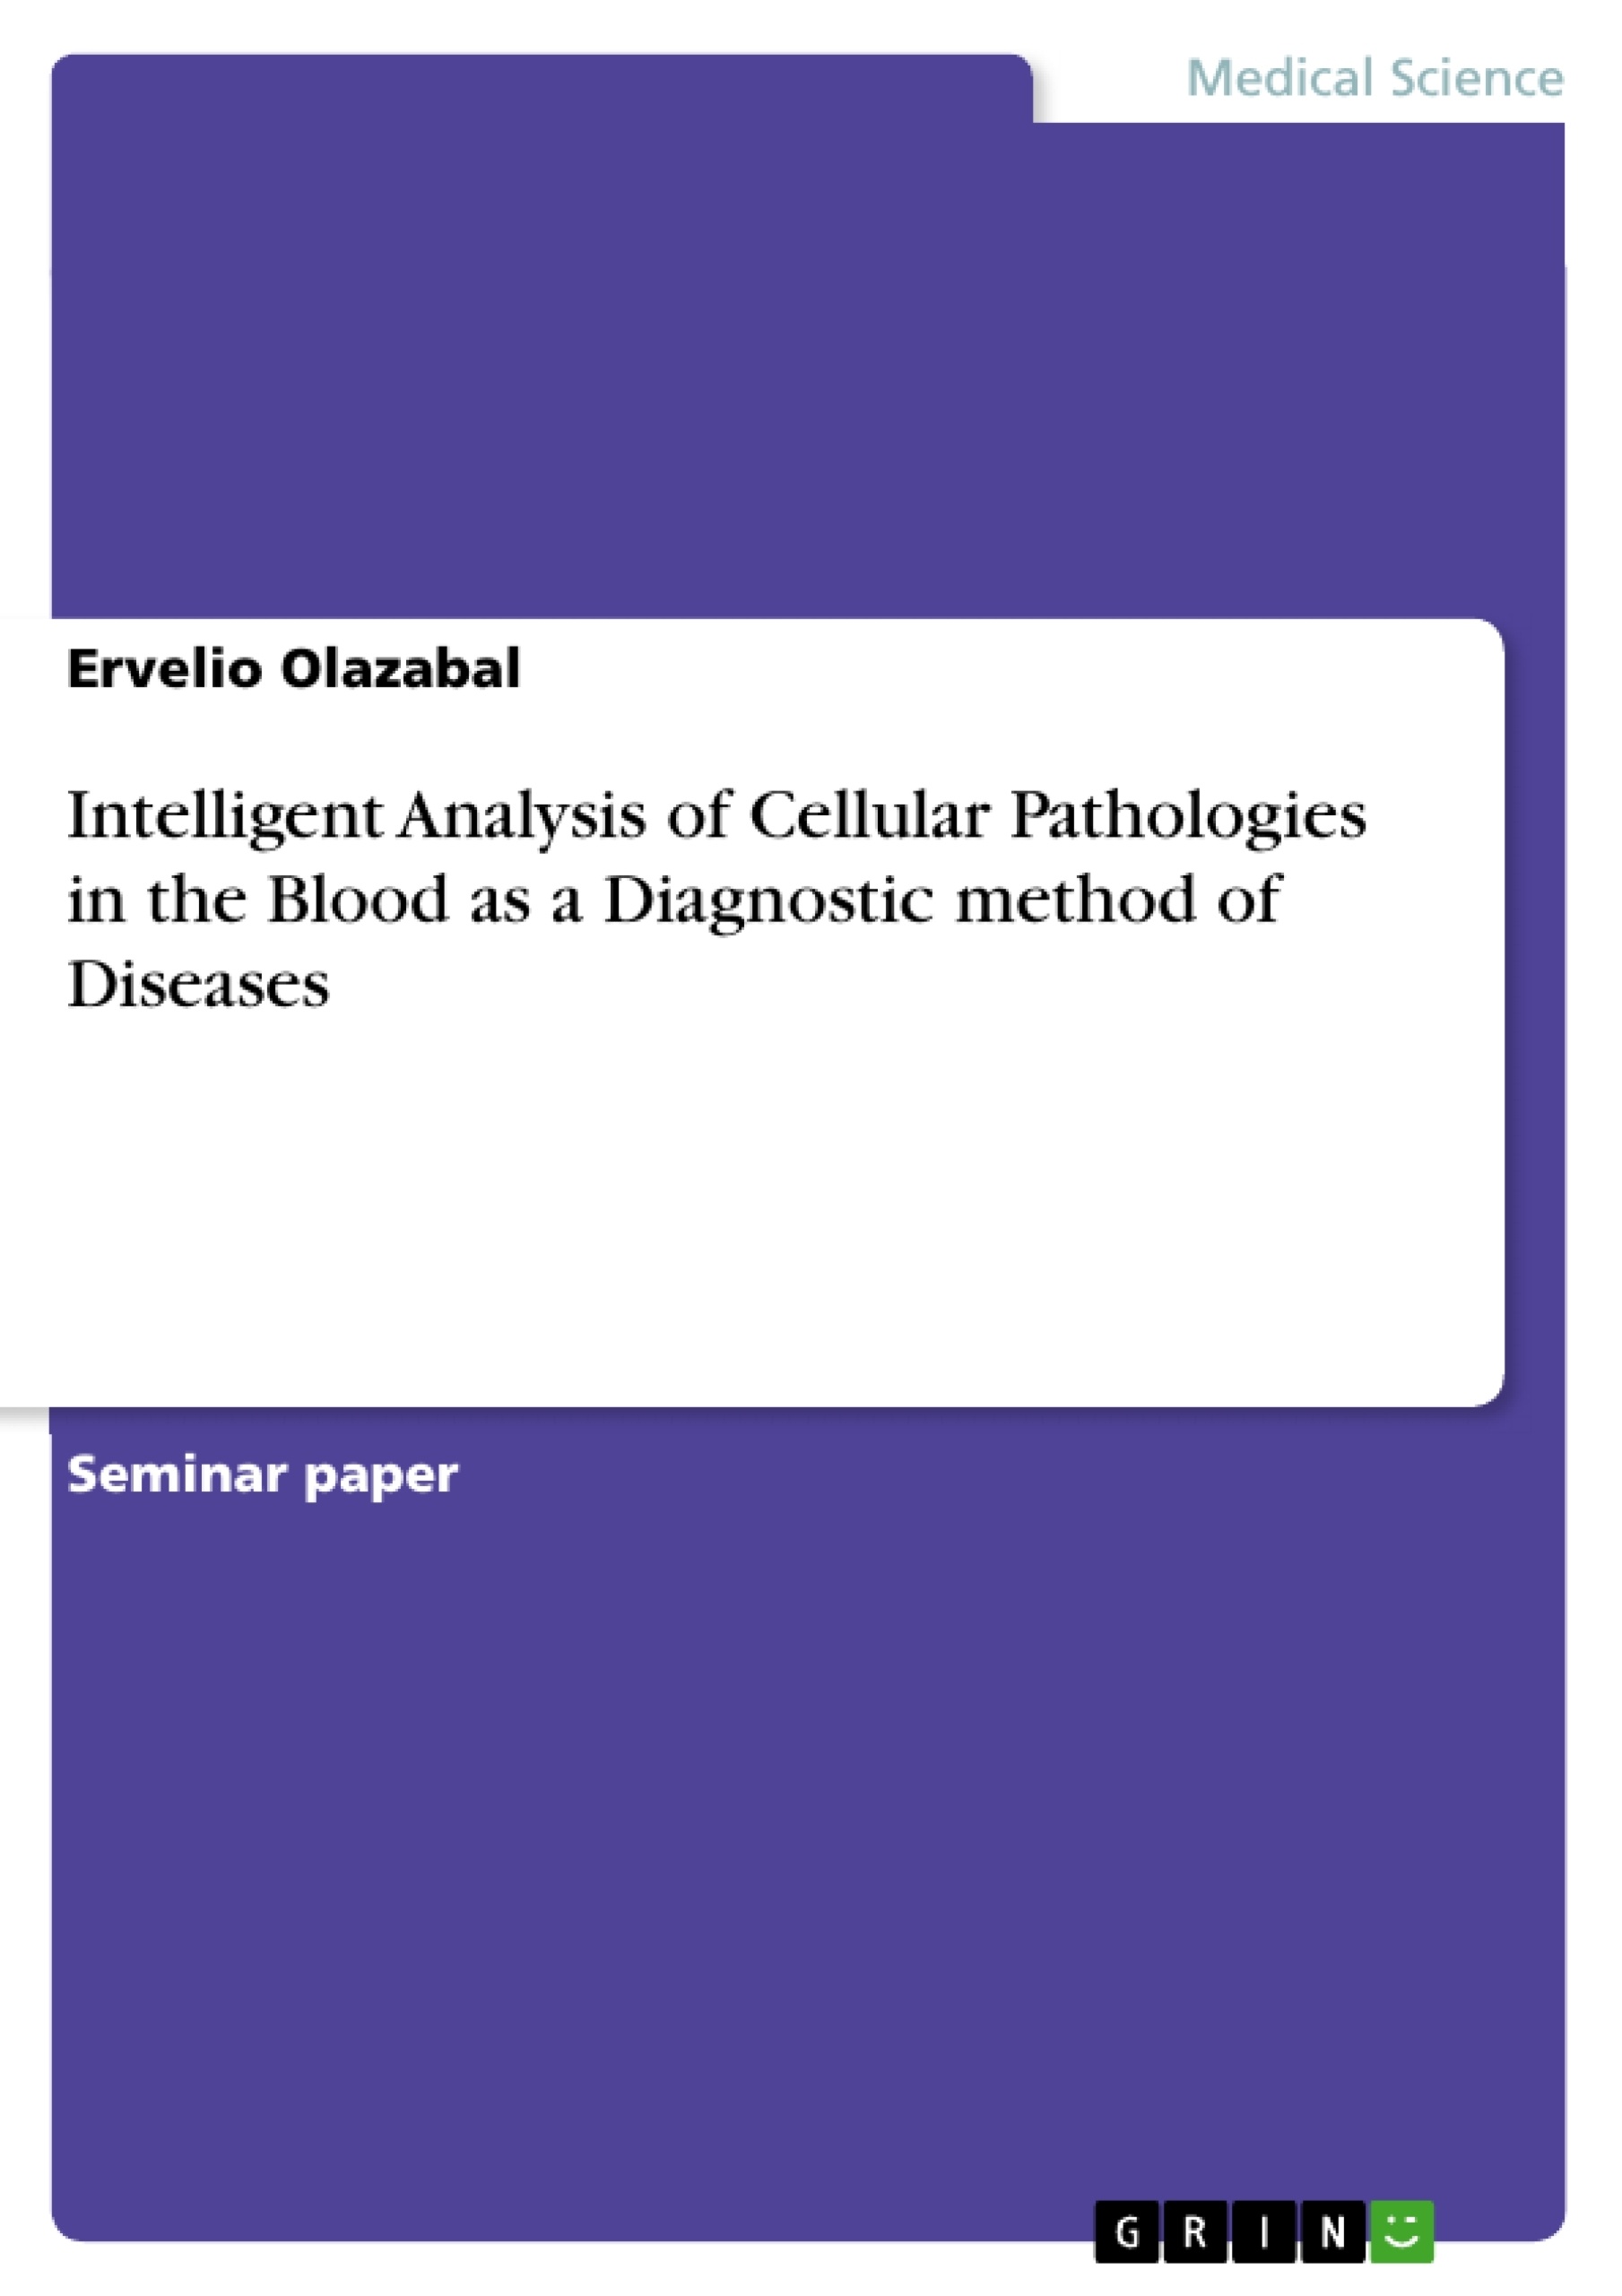 Título: Intelligent Analysis of Cellular Pathologies in the Blood as a Diagnostic method of Diseases